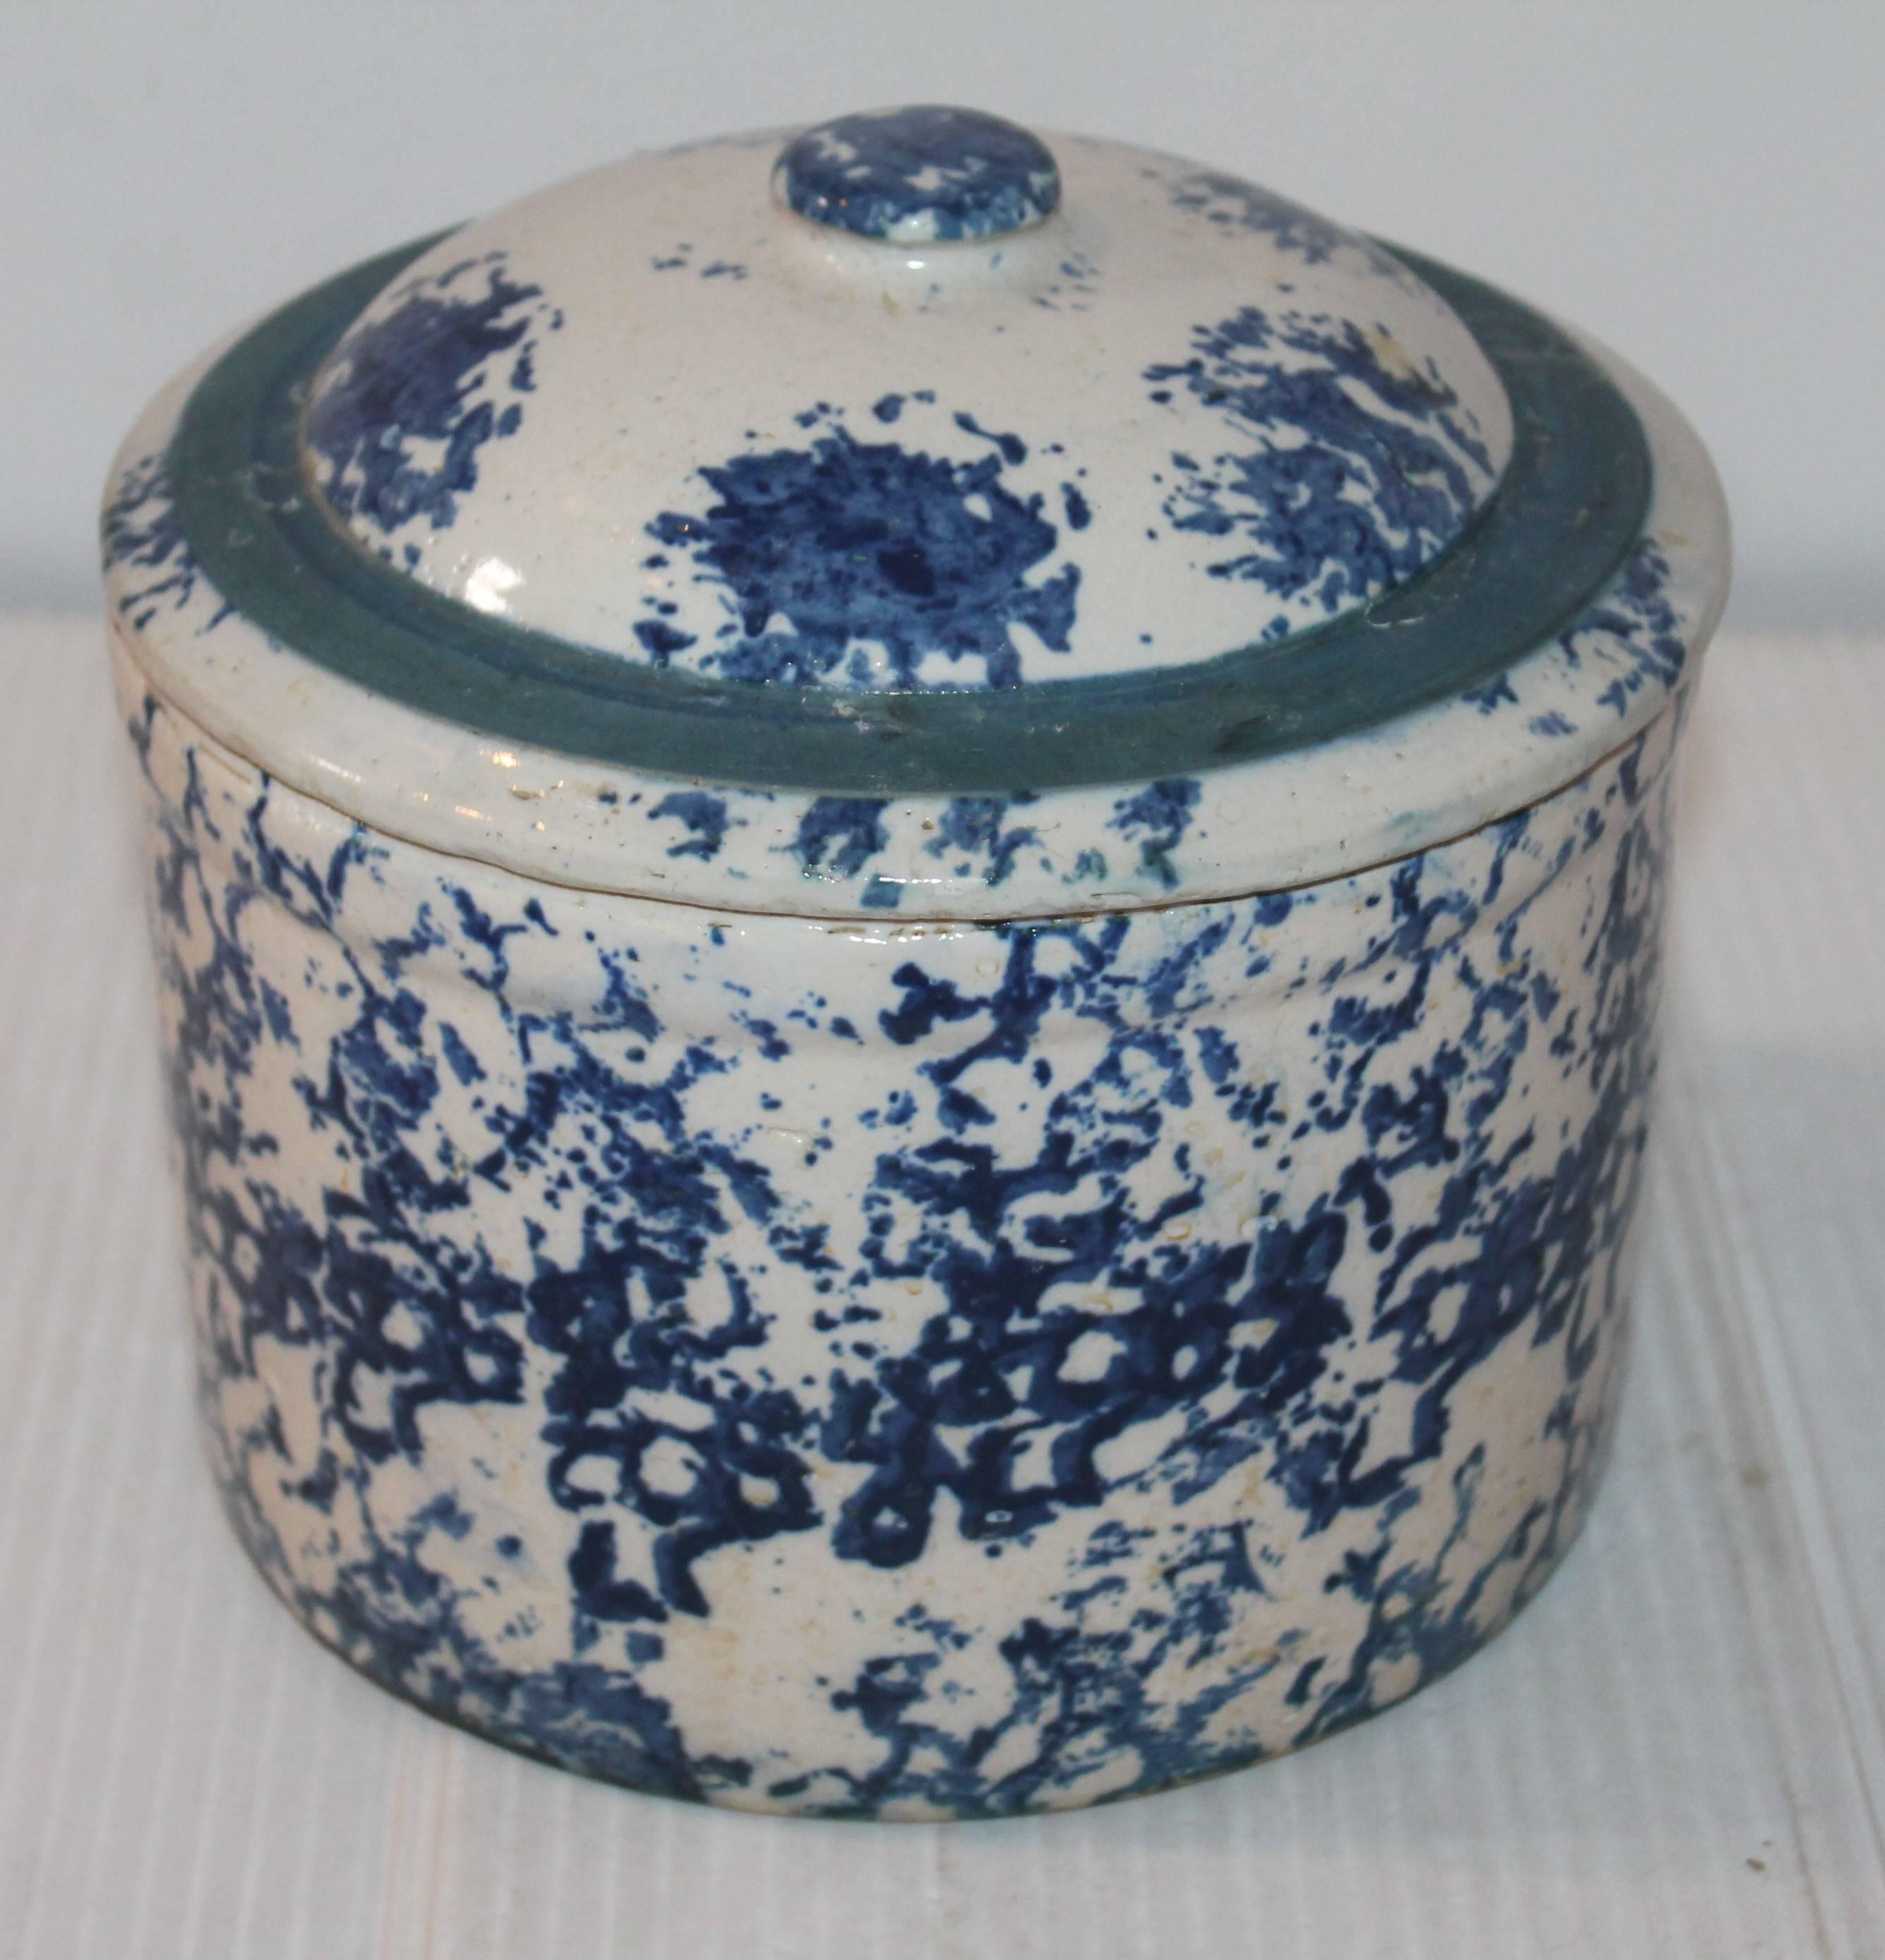 19th century rare sponge ware butter crock or salt crock with lid. The condition is good with minor chips on base. This is a most unusual piece of pottery.